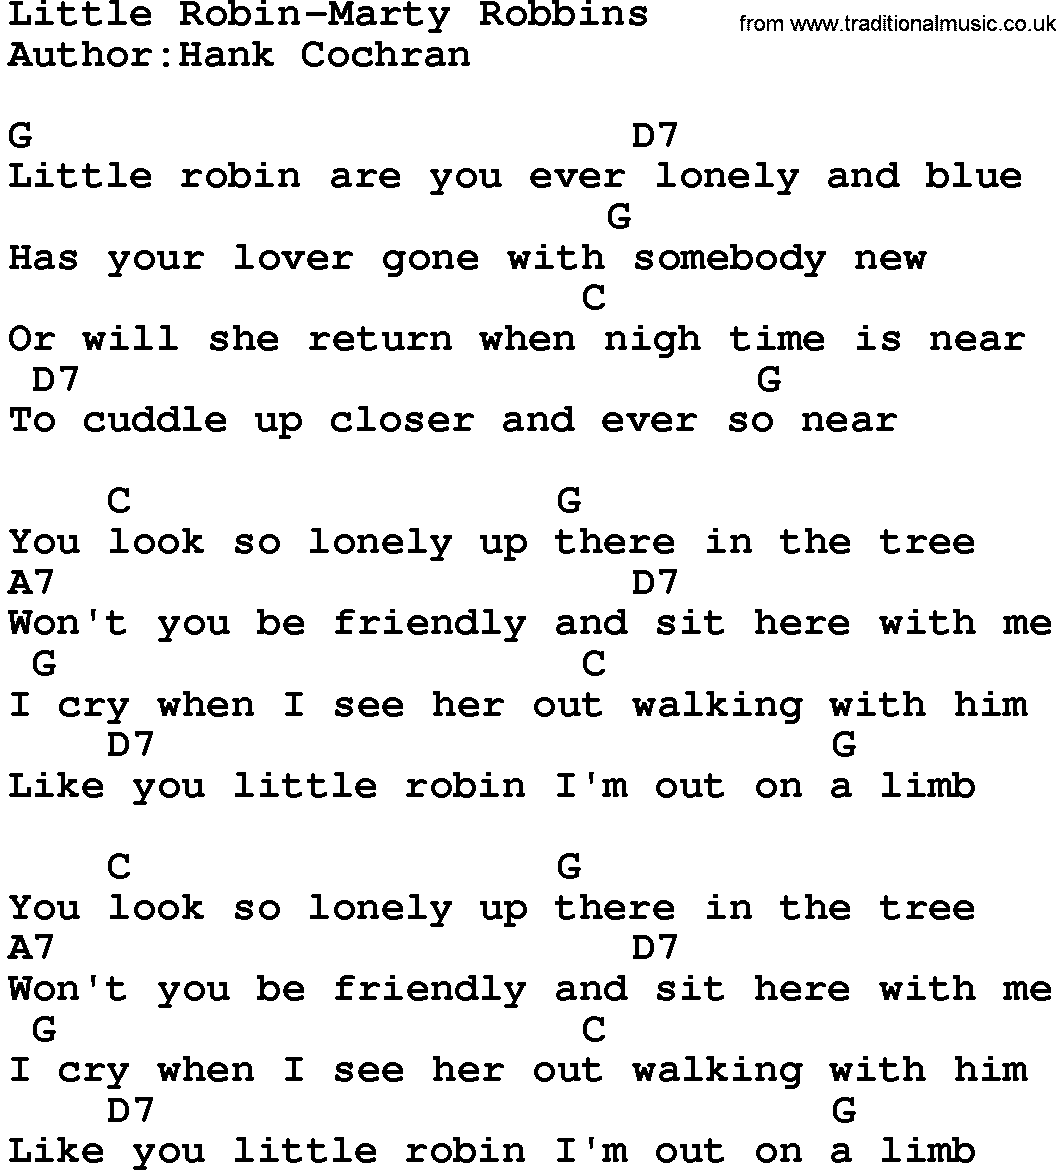 Country music song: Little Robin-Marty Robbins lyrics and chords